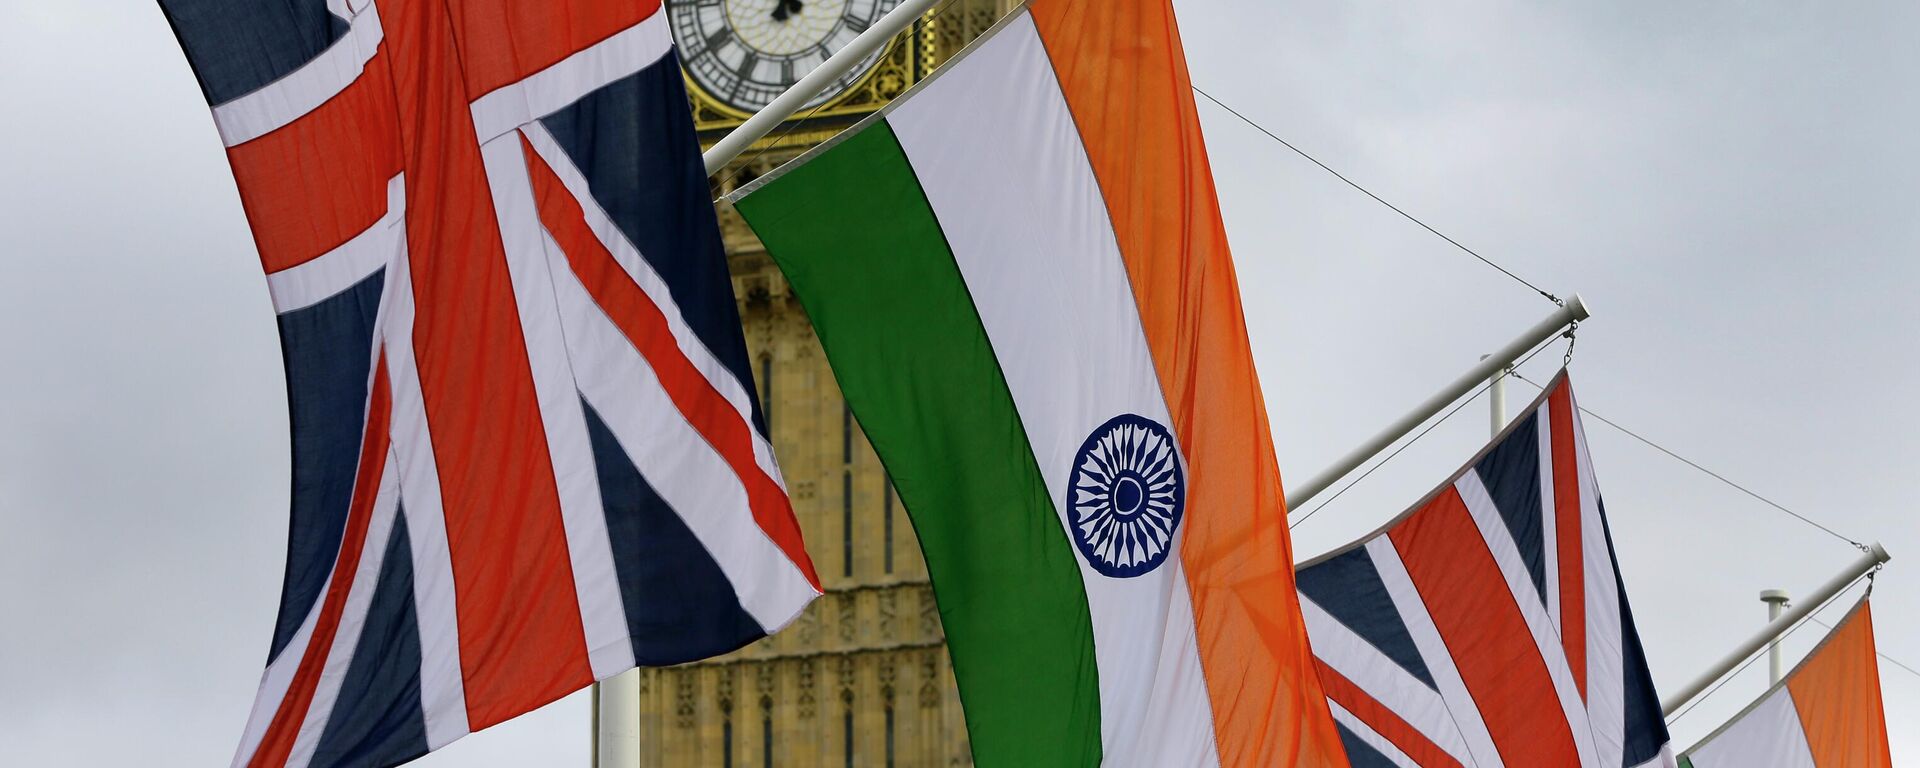 The Union and Indian flags hang near  the London landmark Big Ben  in Parliament Square in London, Thursday, Nov. 12, 2015 - Sputnik International, 1920, 03.09.2022